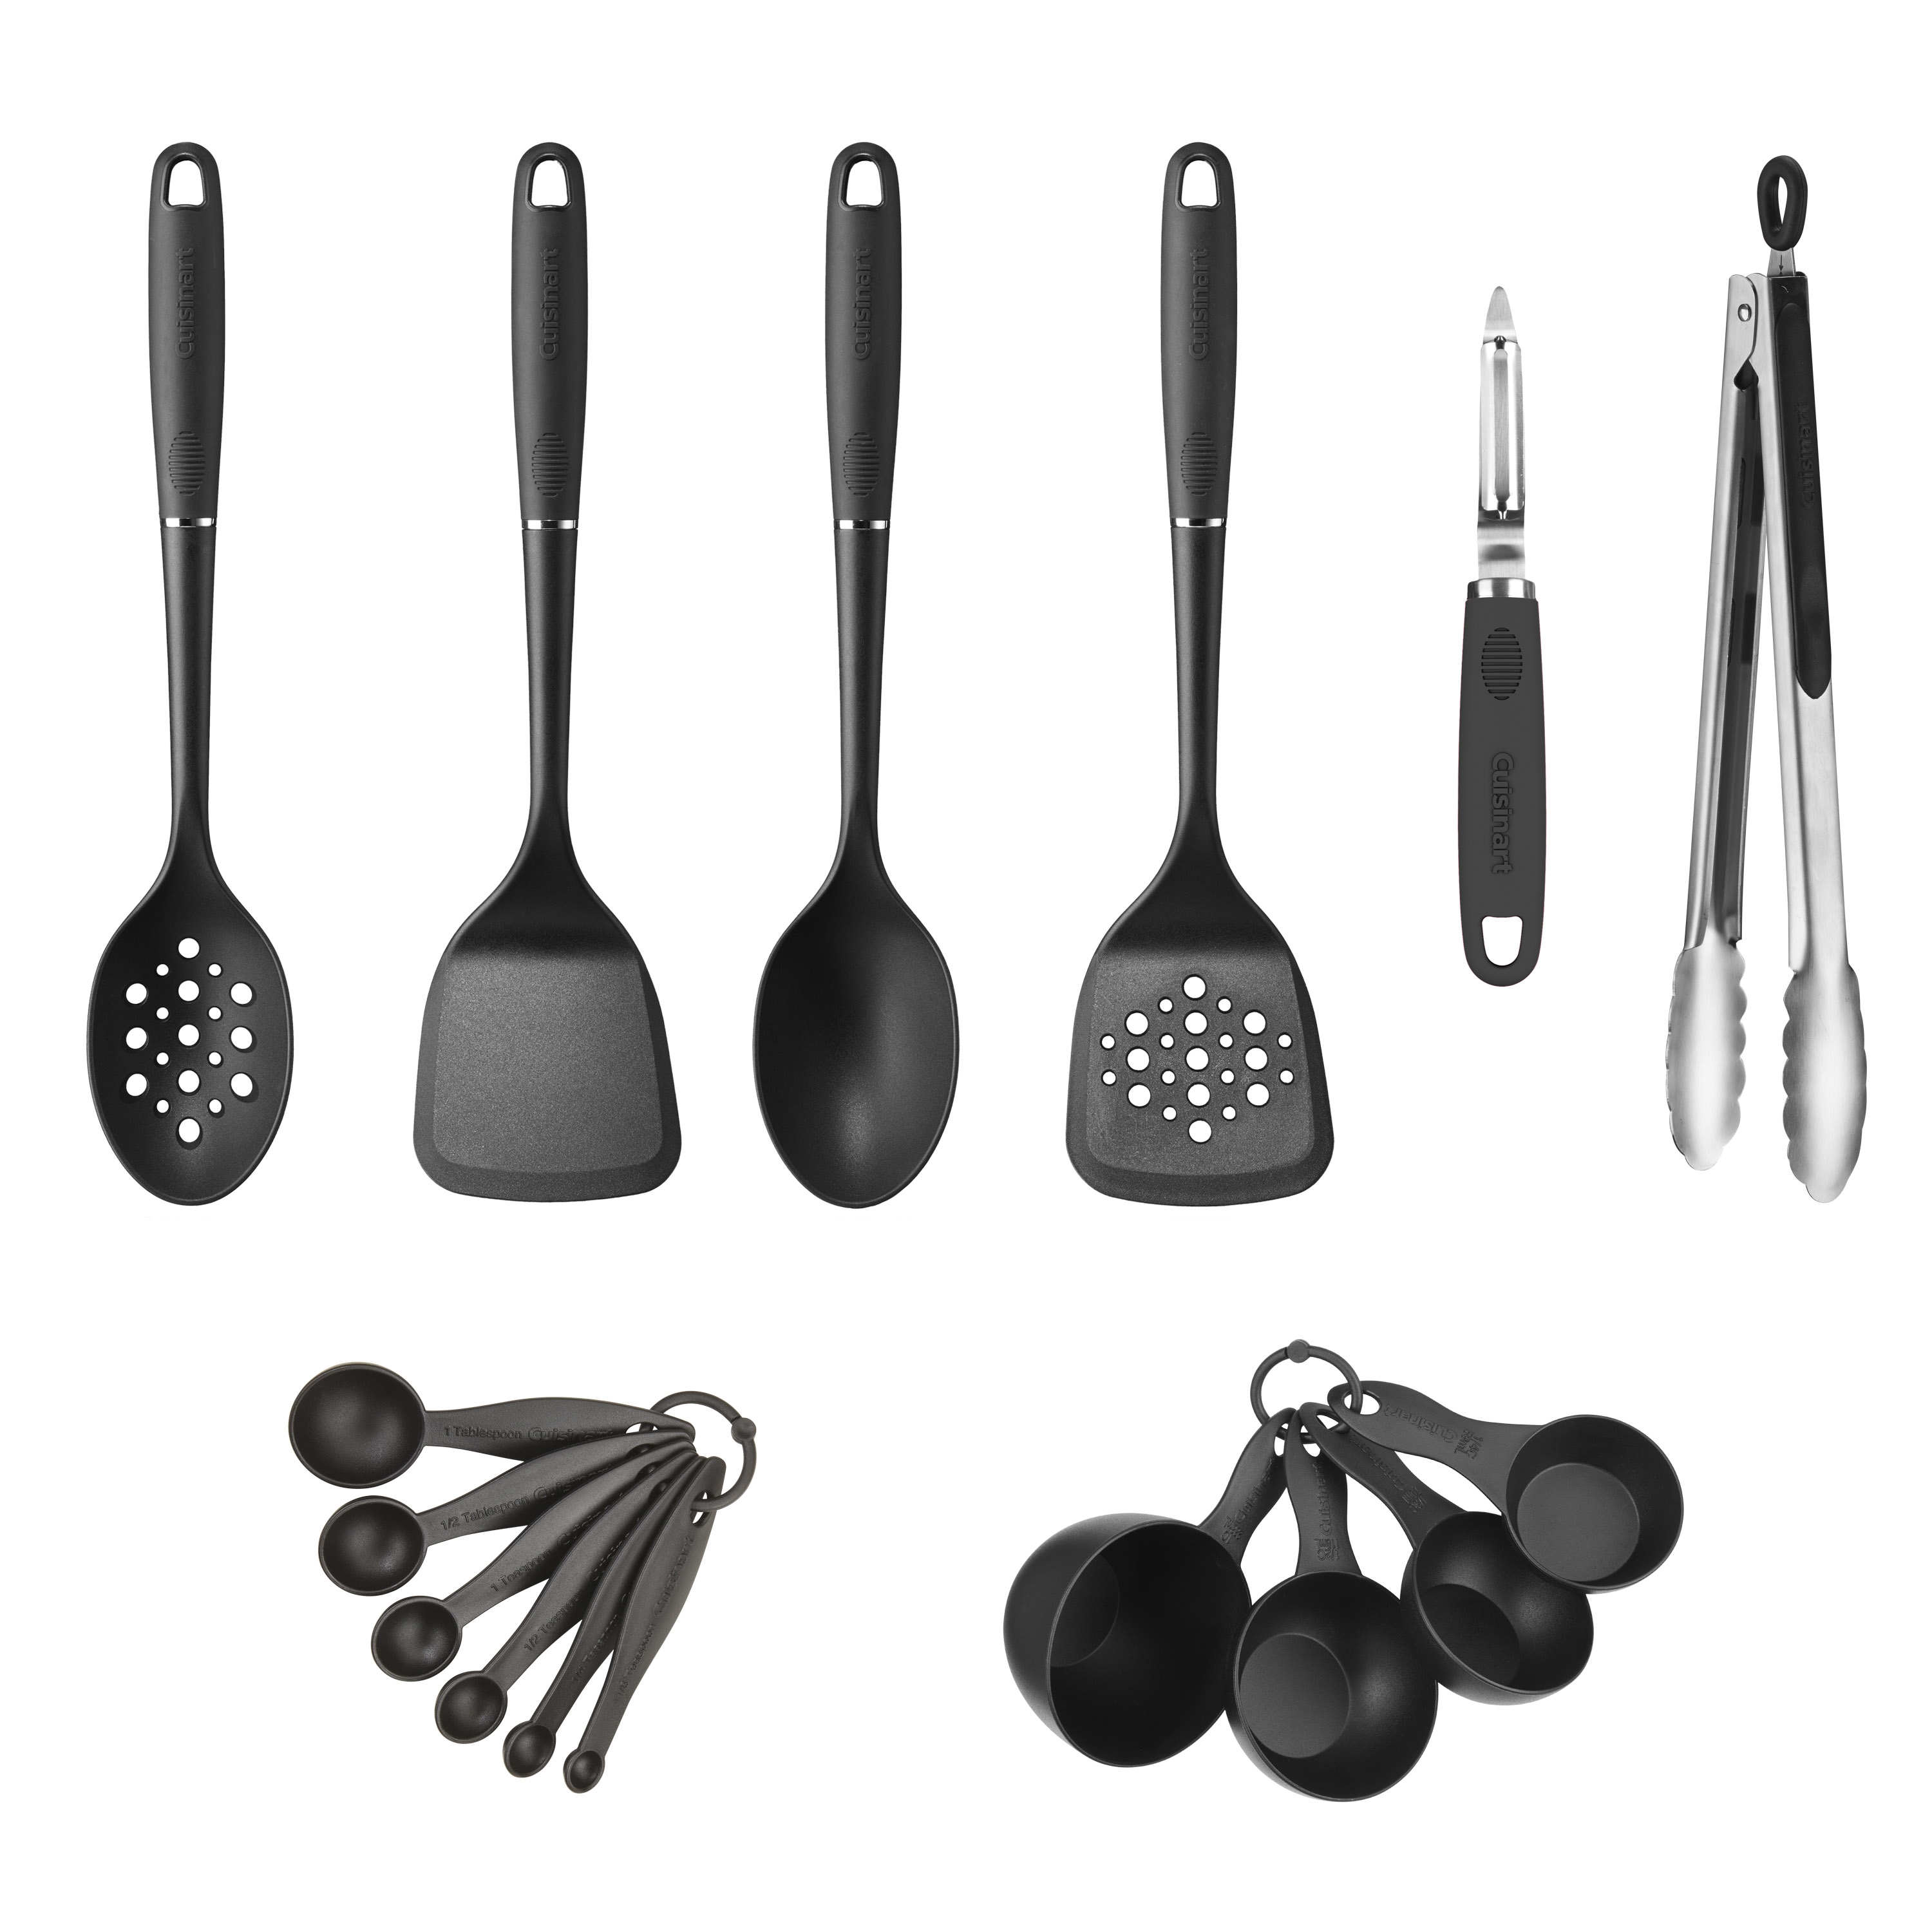 Discontinued 16pc Primary Tool and Gadget Set